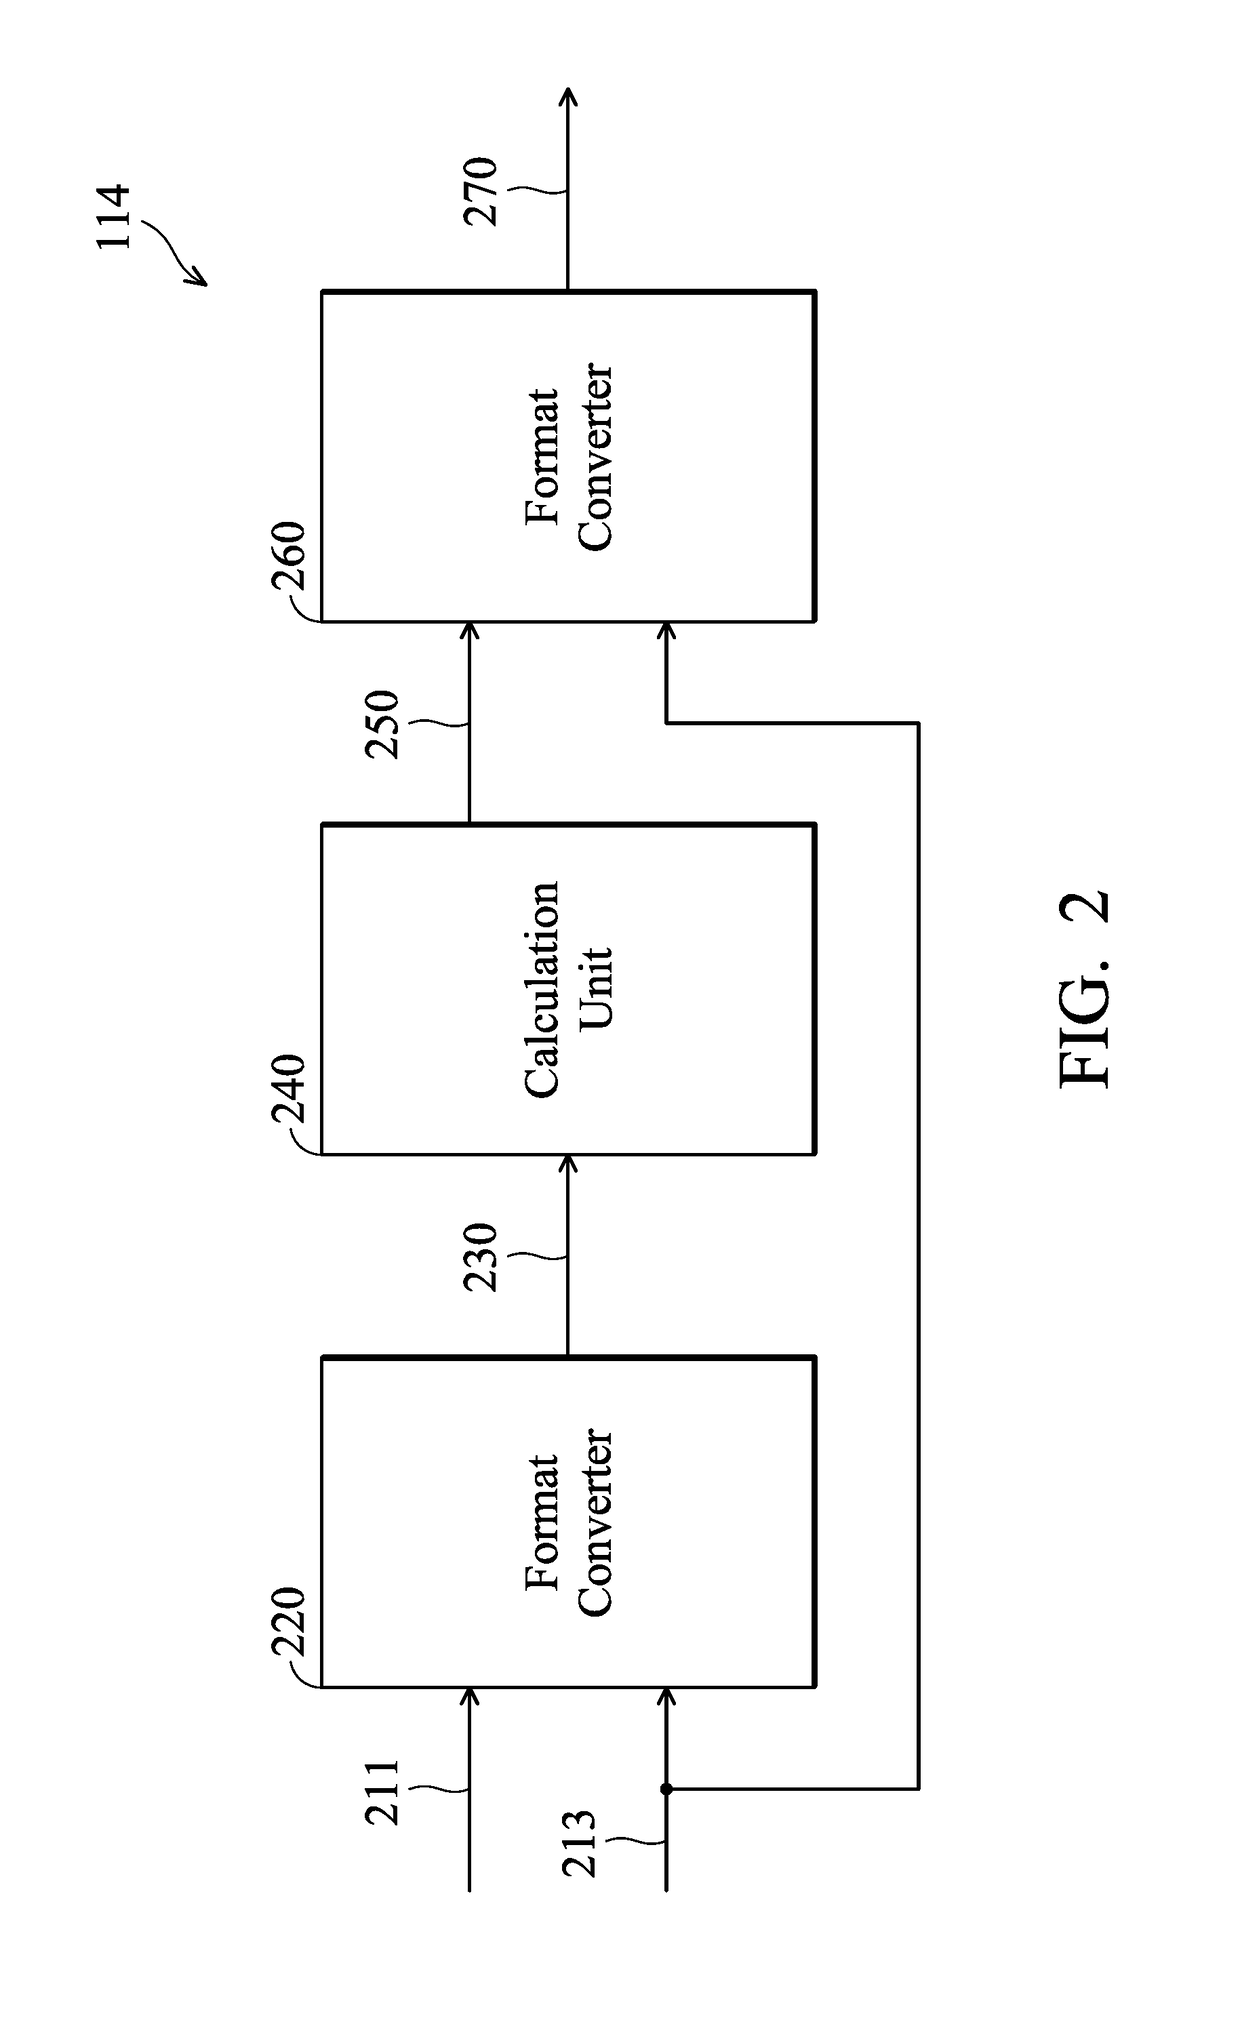 Methods for calculating floating-point operands and apparatuses using the same